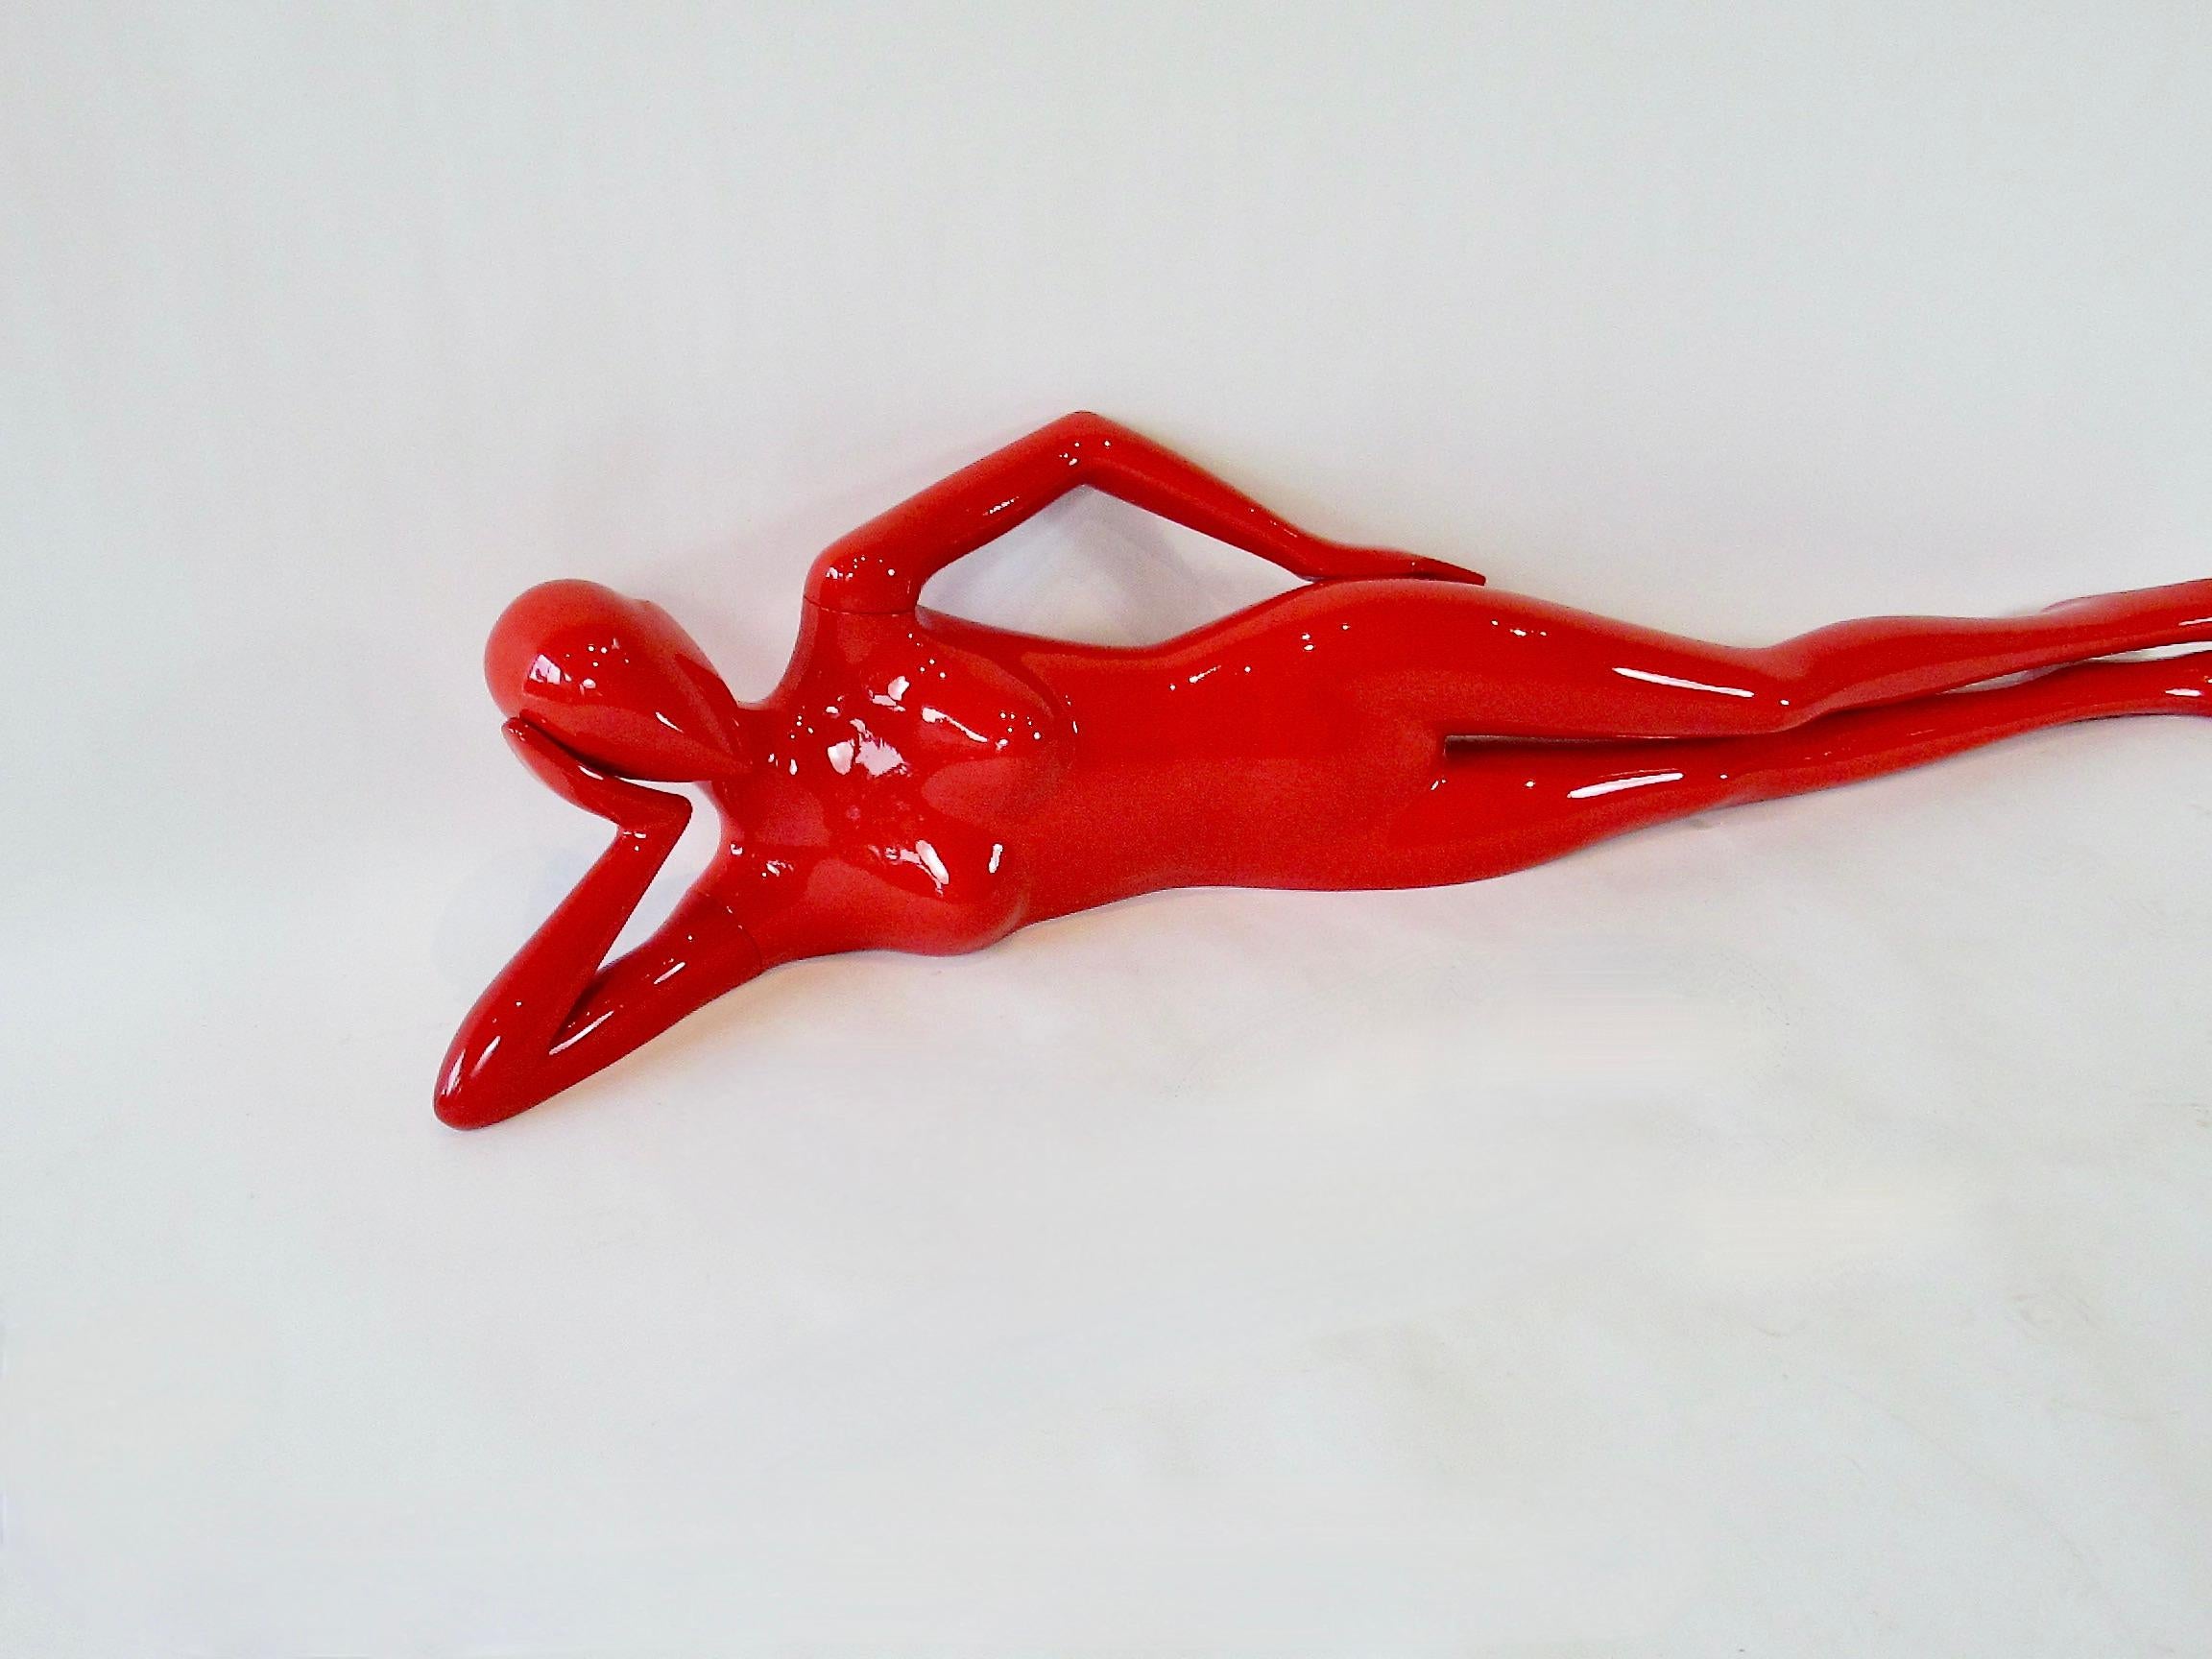 American Sexy lady in red mannequin sculpture in head on hand repose